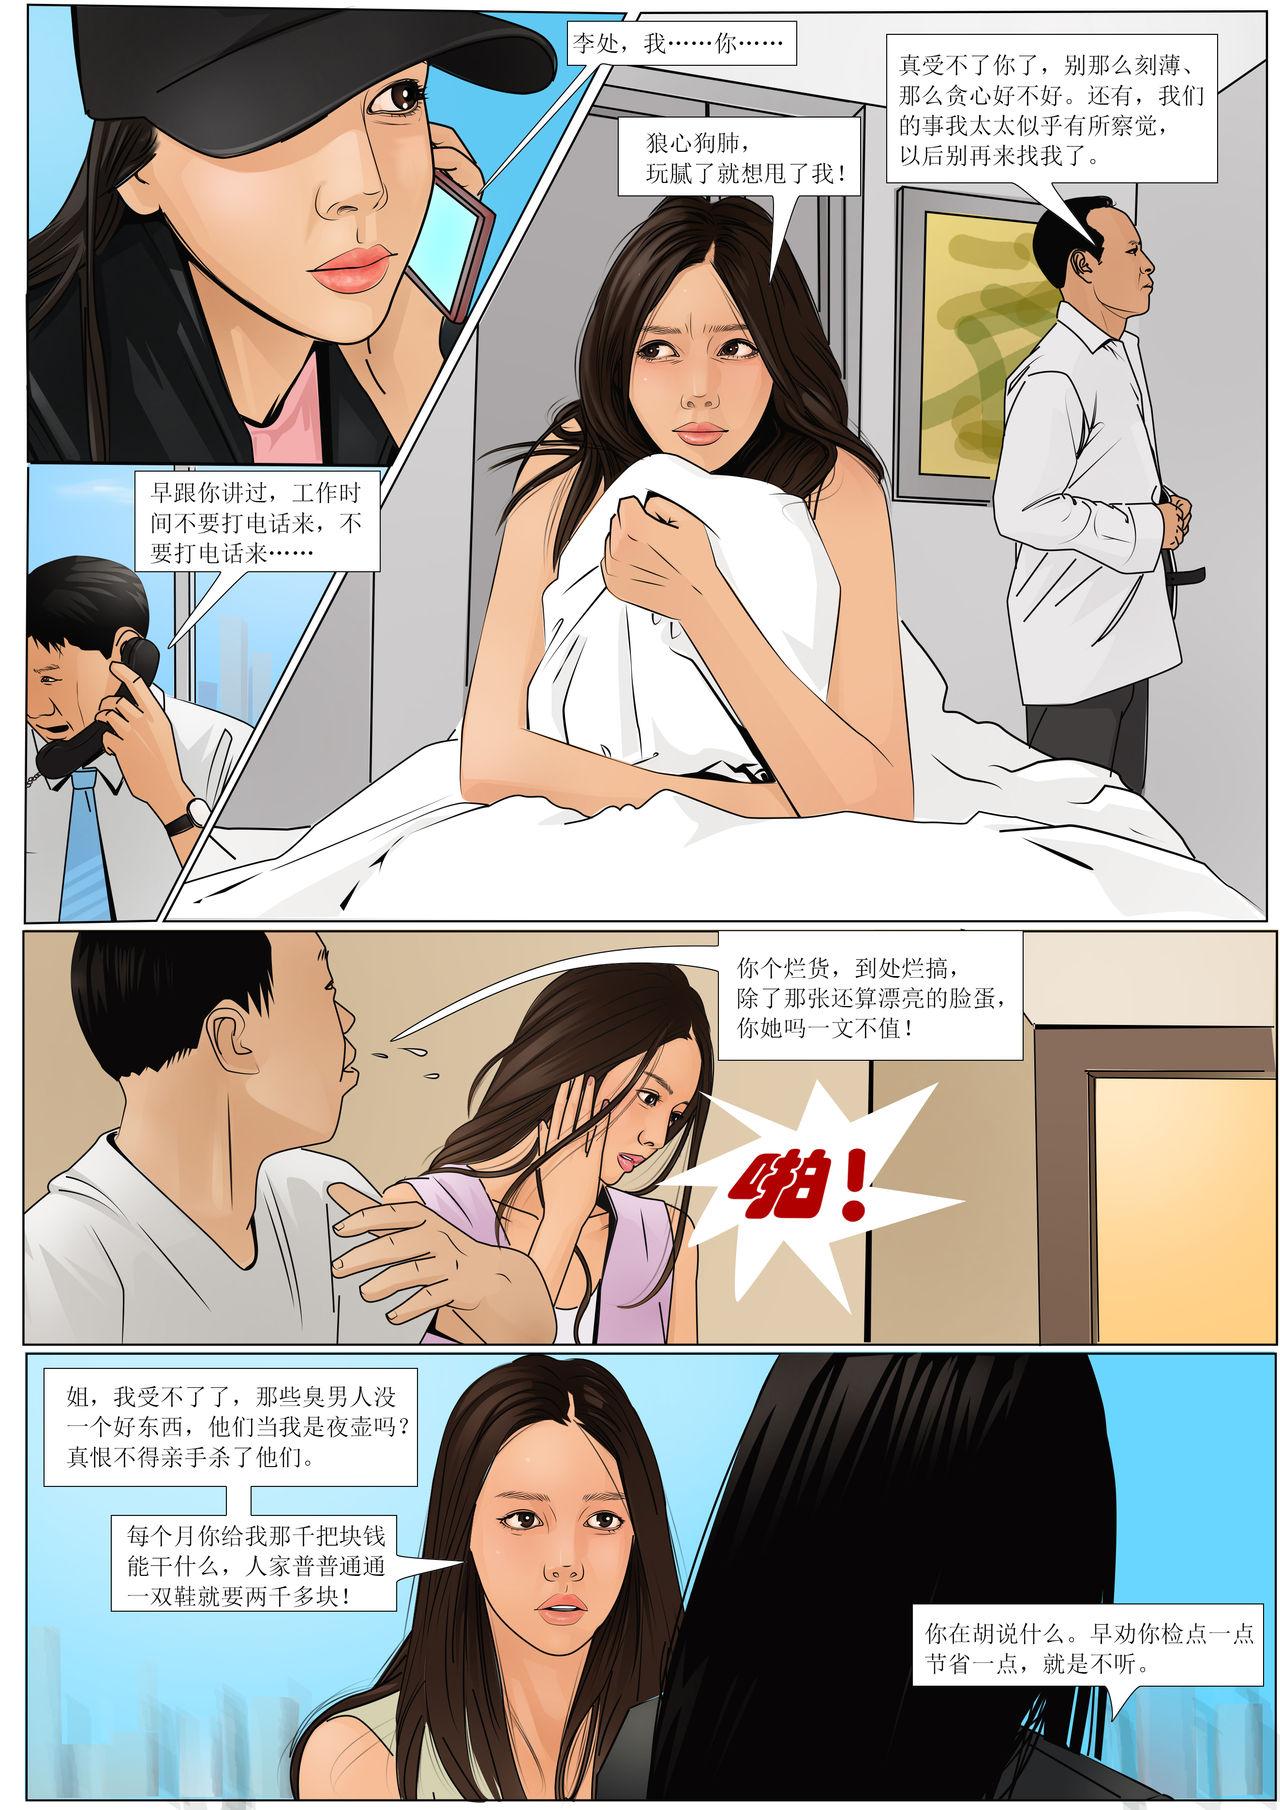 Long Hair 枫语漫画 Foryou 《极度重犯》第八话 Three Female Prisoners 8 Chinese Free Rough Porn - Page 5